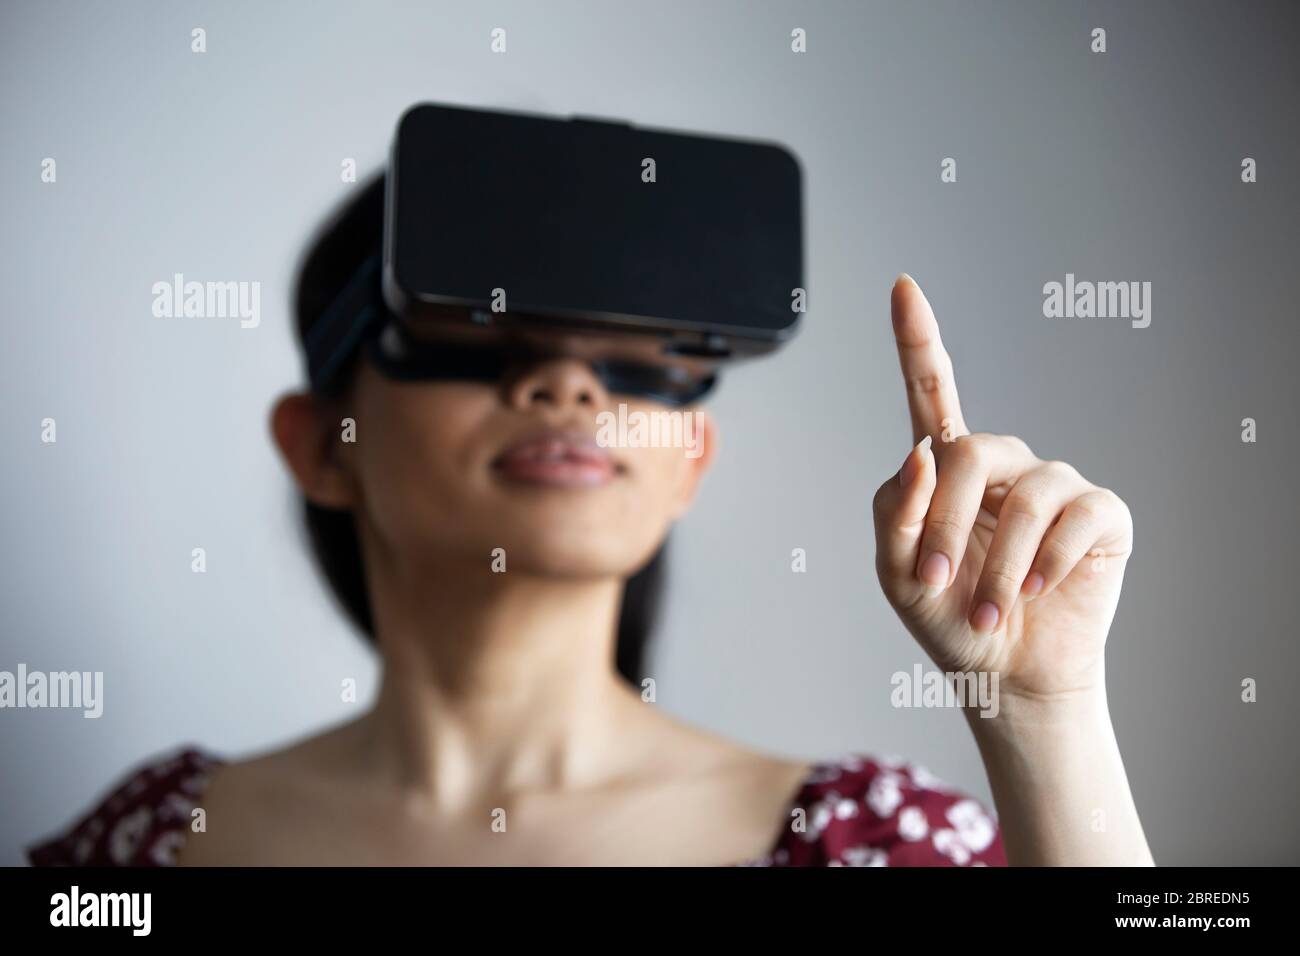 Coronavirus Covid-19 pandemic concept, stay at home, social distancing, traveling and visiting in virtual reality. Experiencing the world. Stock Photo